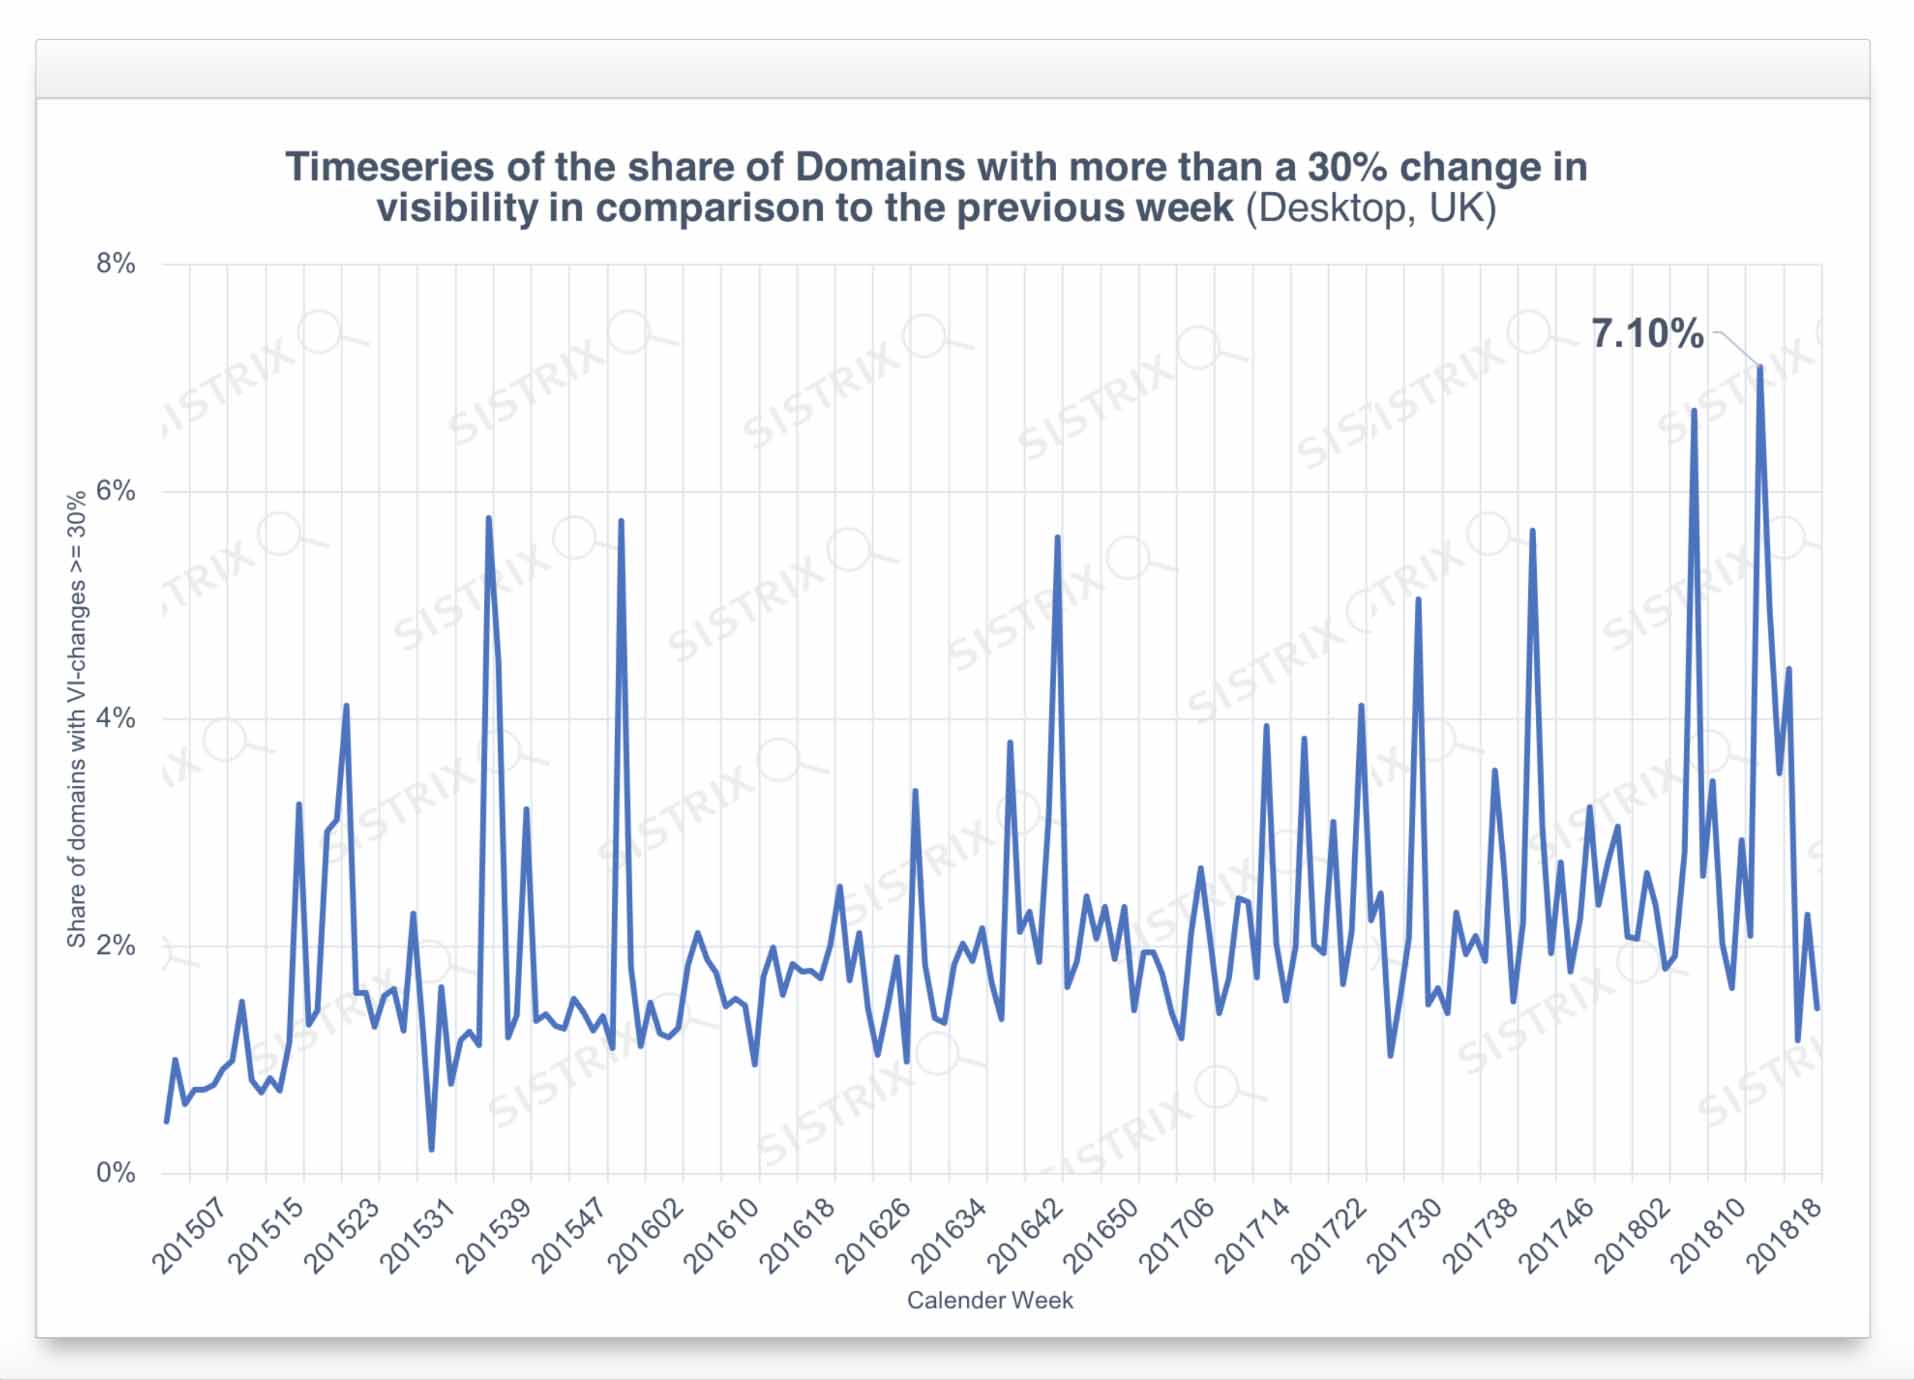 Domains with more than 30% change in visibility - Desktop Spain